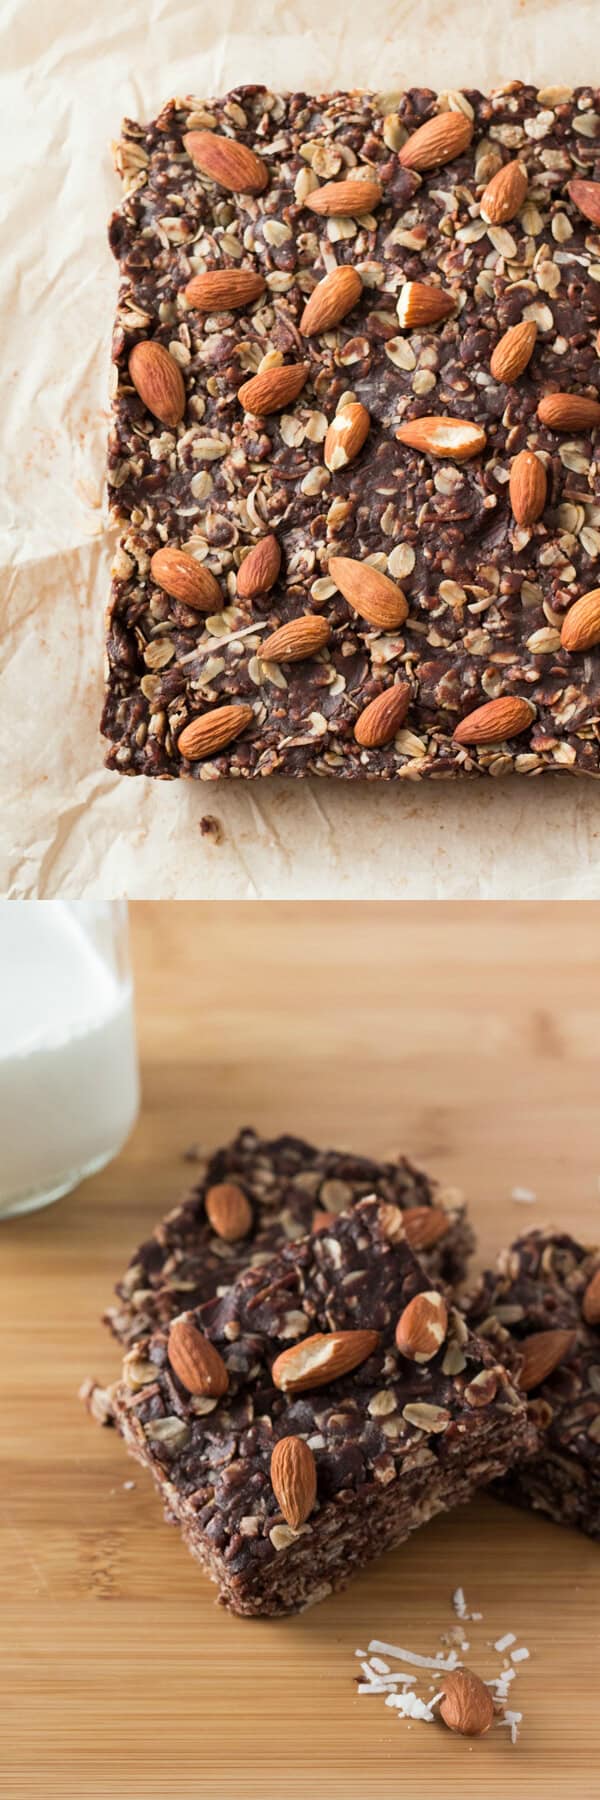 Almonds, coconut & chocolate come together in these delicious Almond Joy Granola Bars. Wholesome ingredients, gluten-free, vegan, super easy and totally addictive! www.justsotasty.com